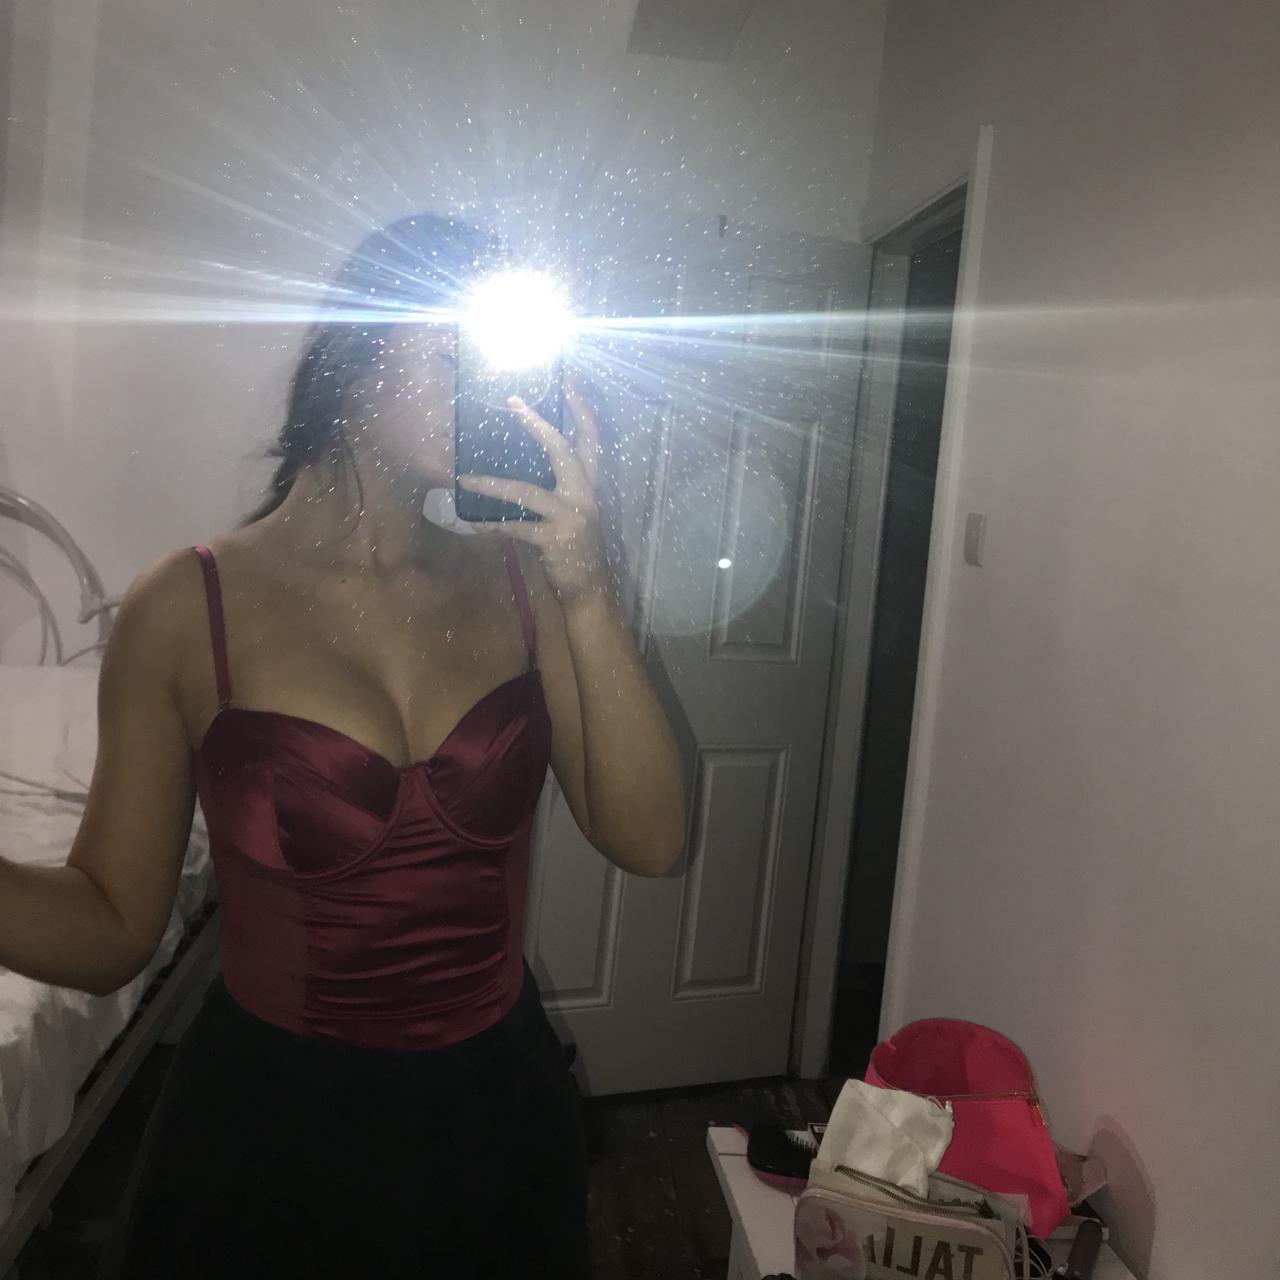 MISSGUIDED thong satin bodysuit super sexy and - Depop